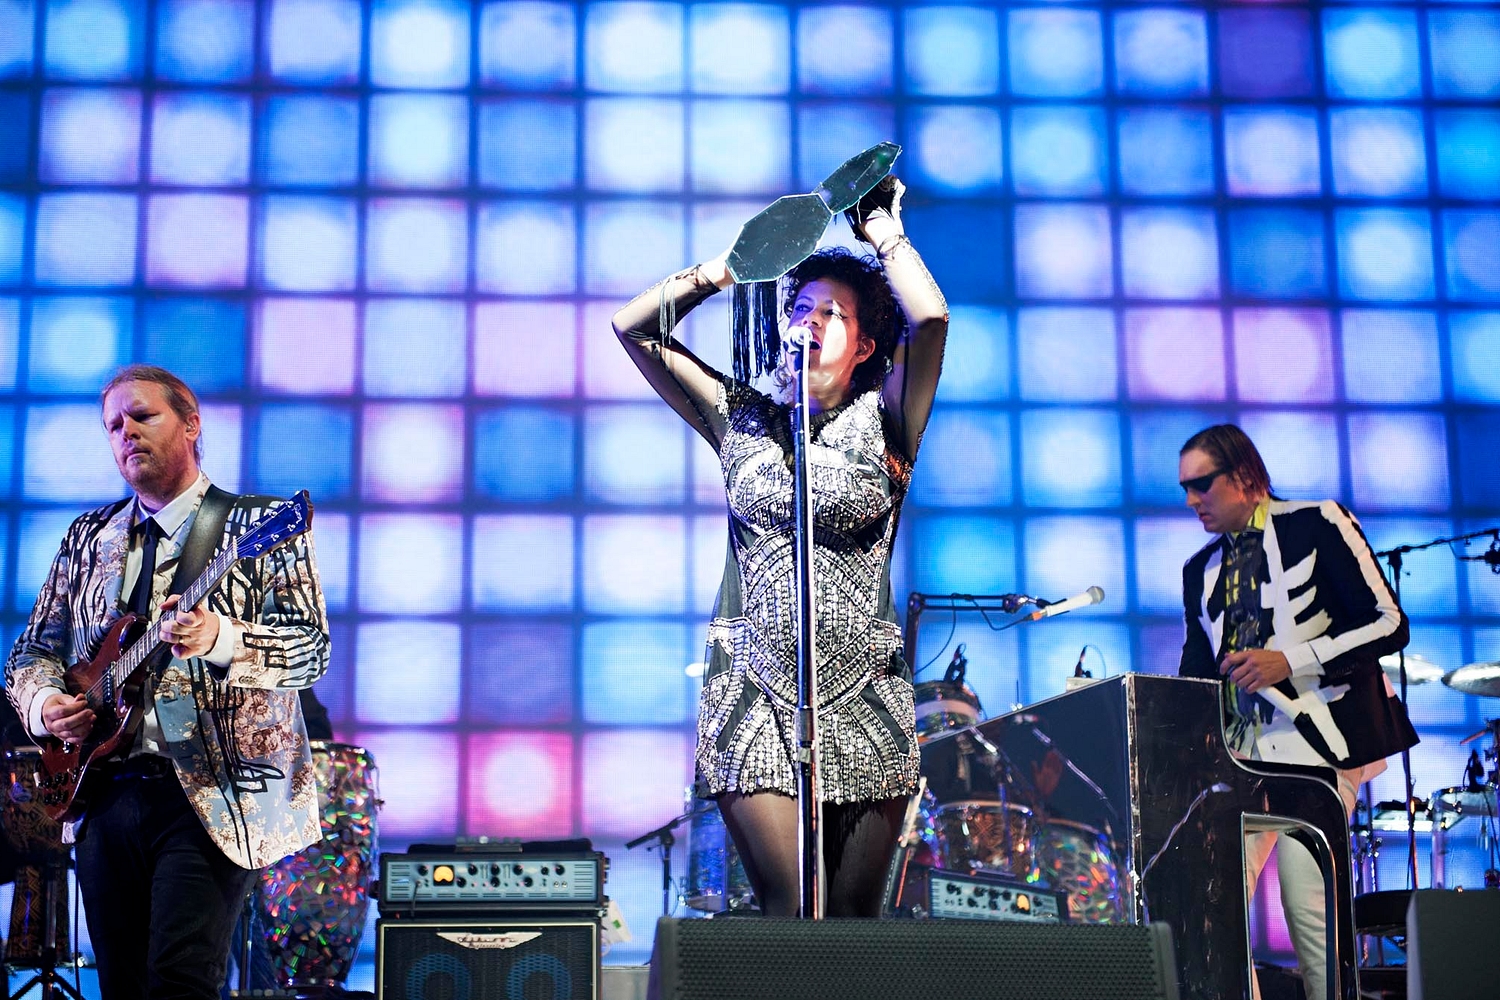 Watch Arcade Fire cover Feist’s ‘I Feel It All’ at Calgary show